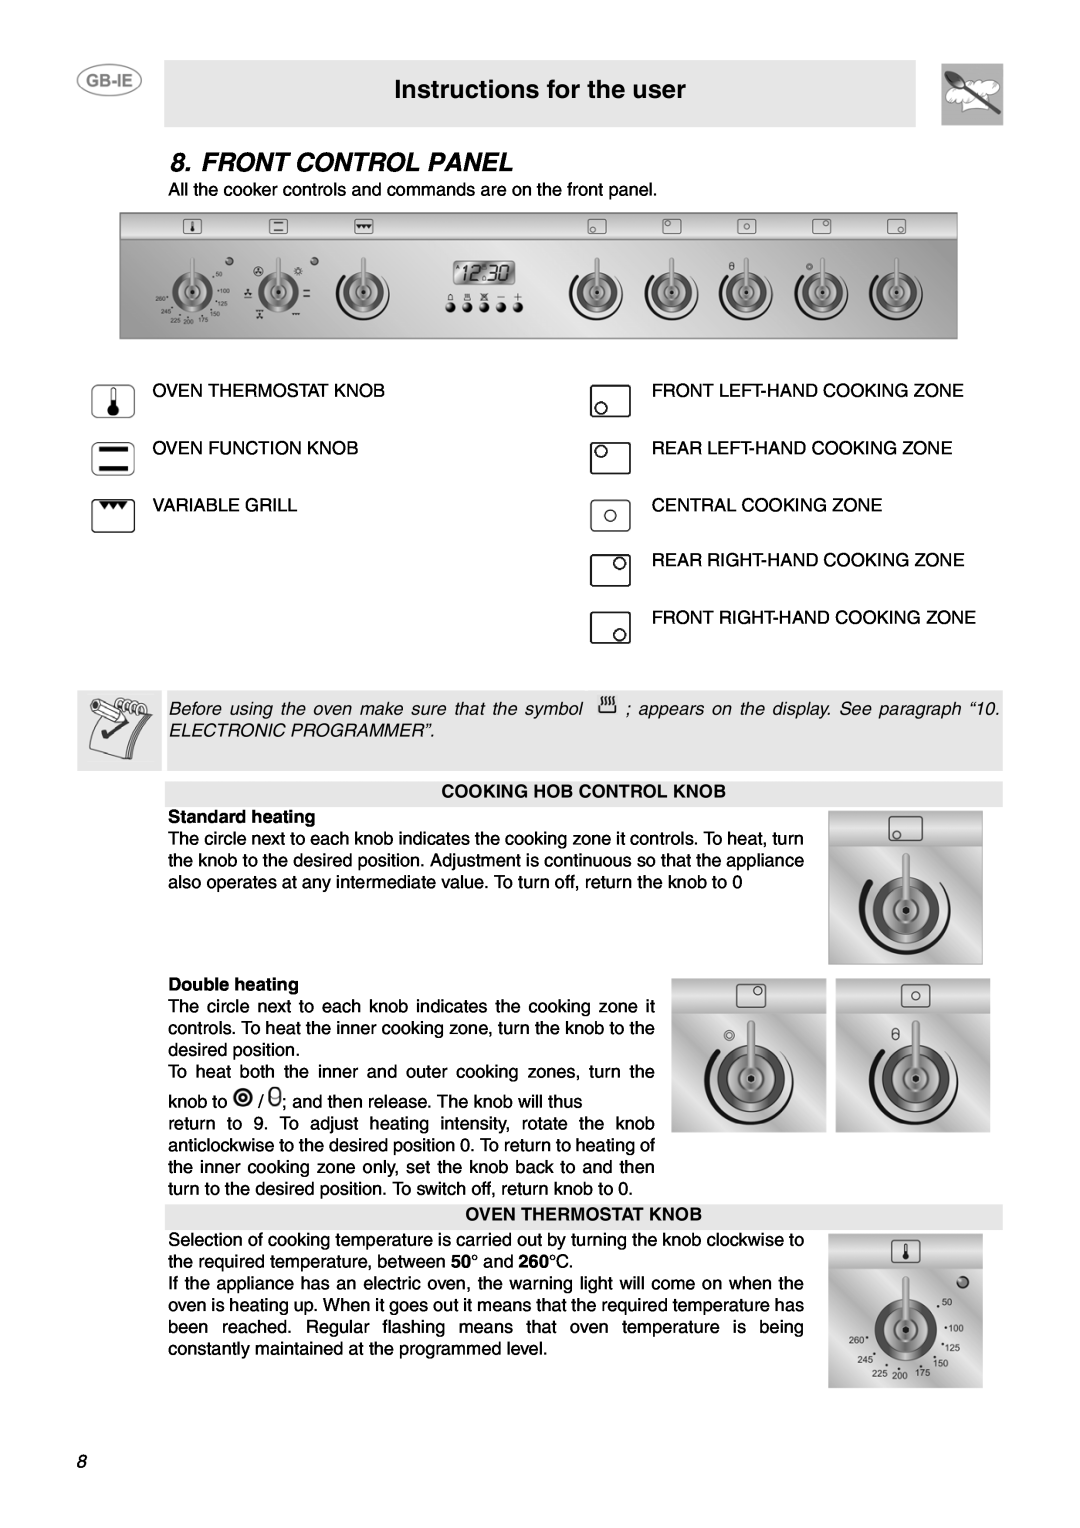 Smeg SUK91CMX5 manual Front Control Panel, Instructions for the user, Electronic Programmer”, Double heating 